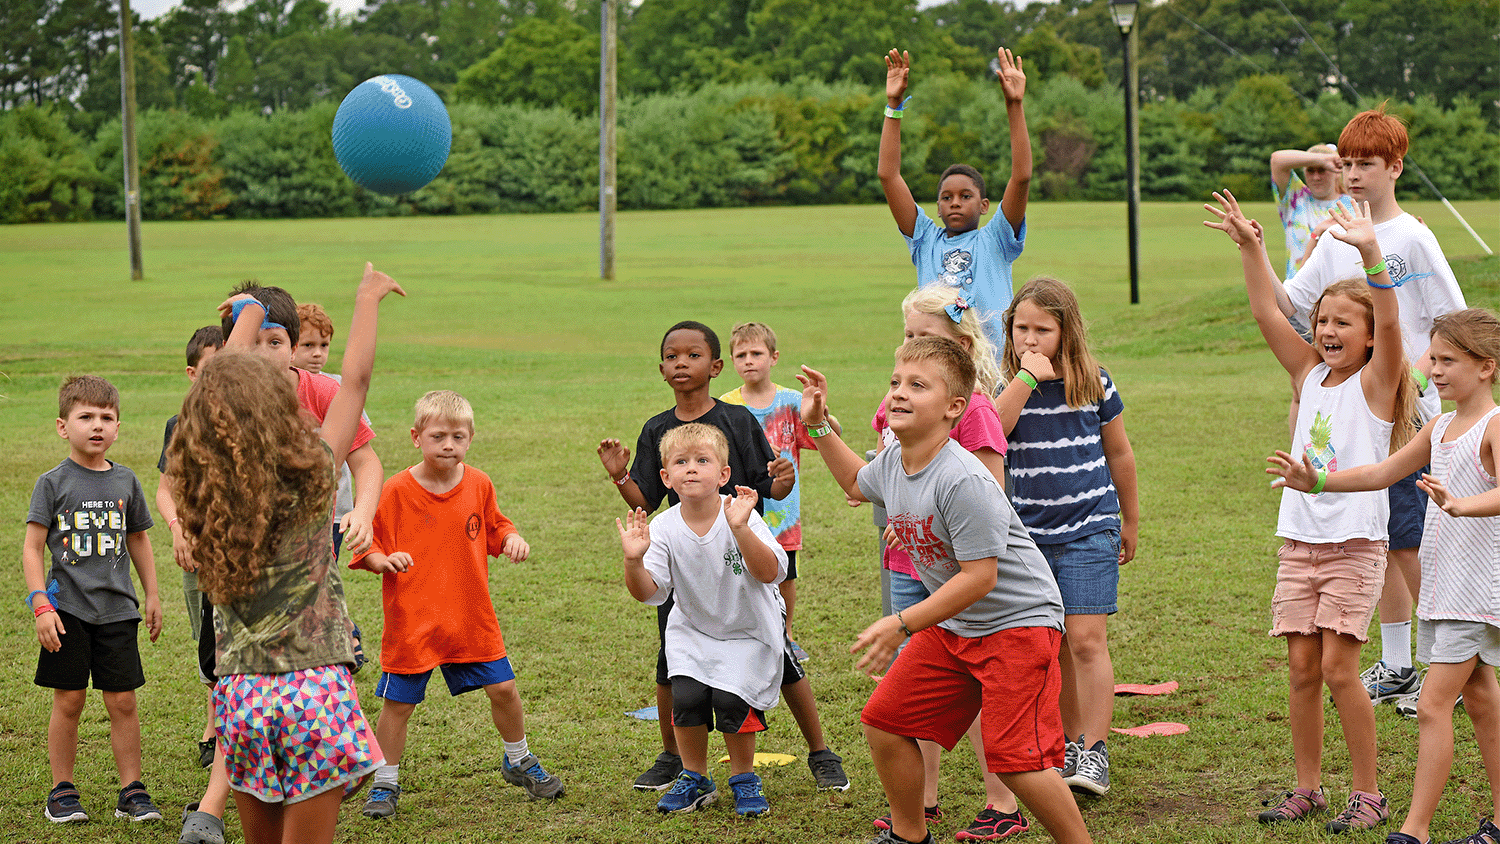 Kids playing in a field at a 4-H camp